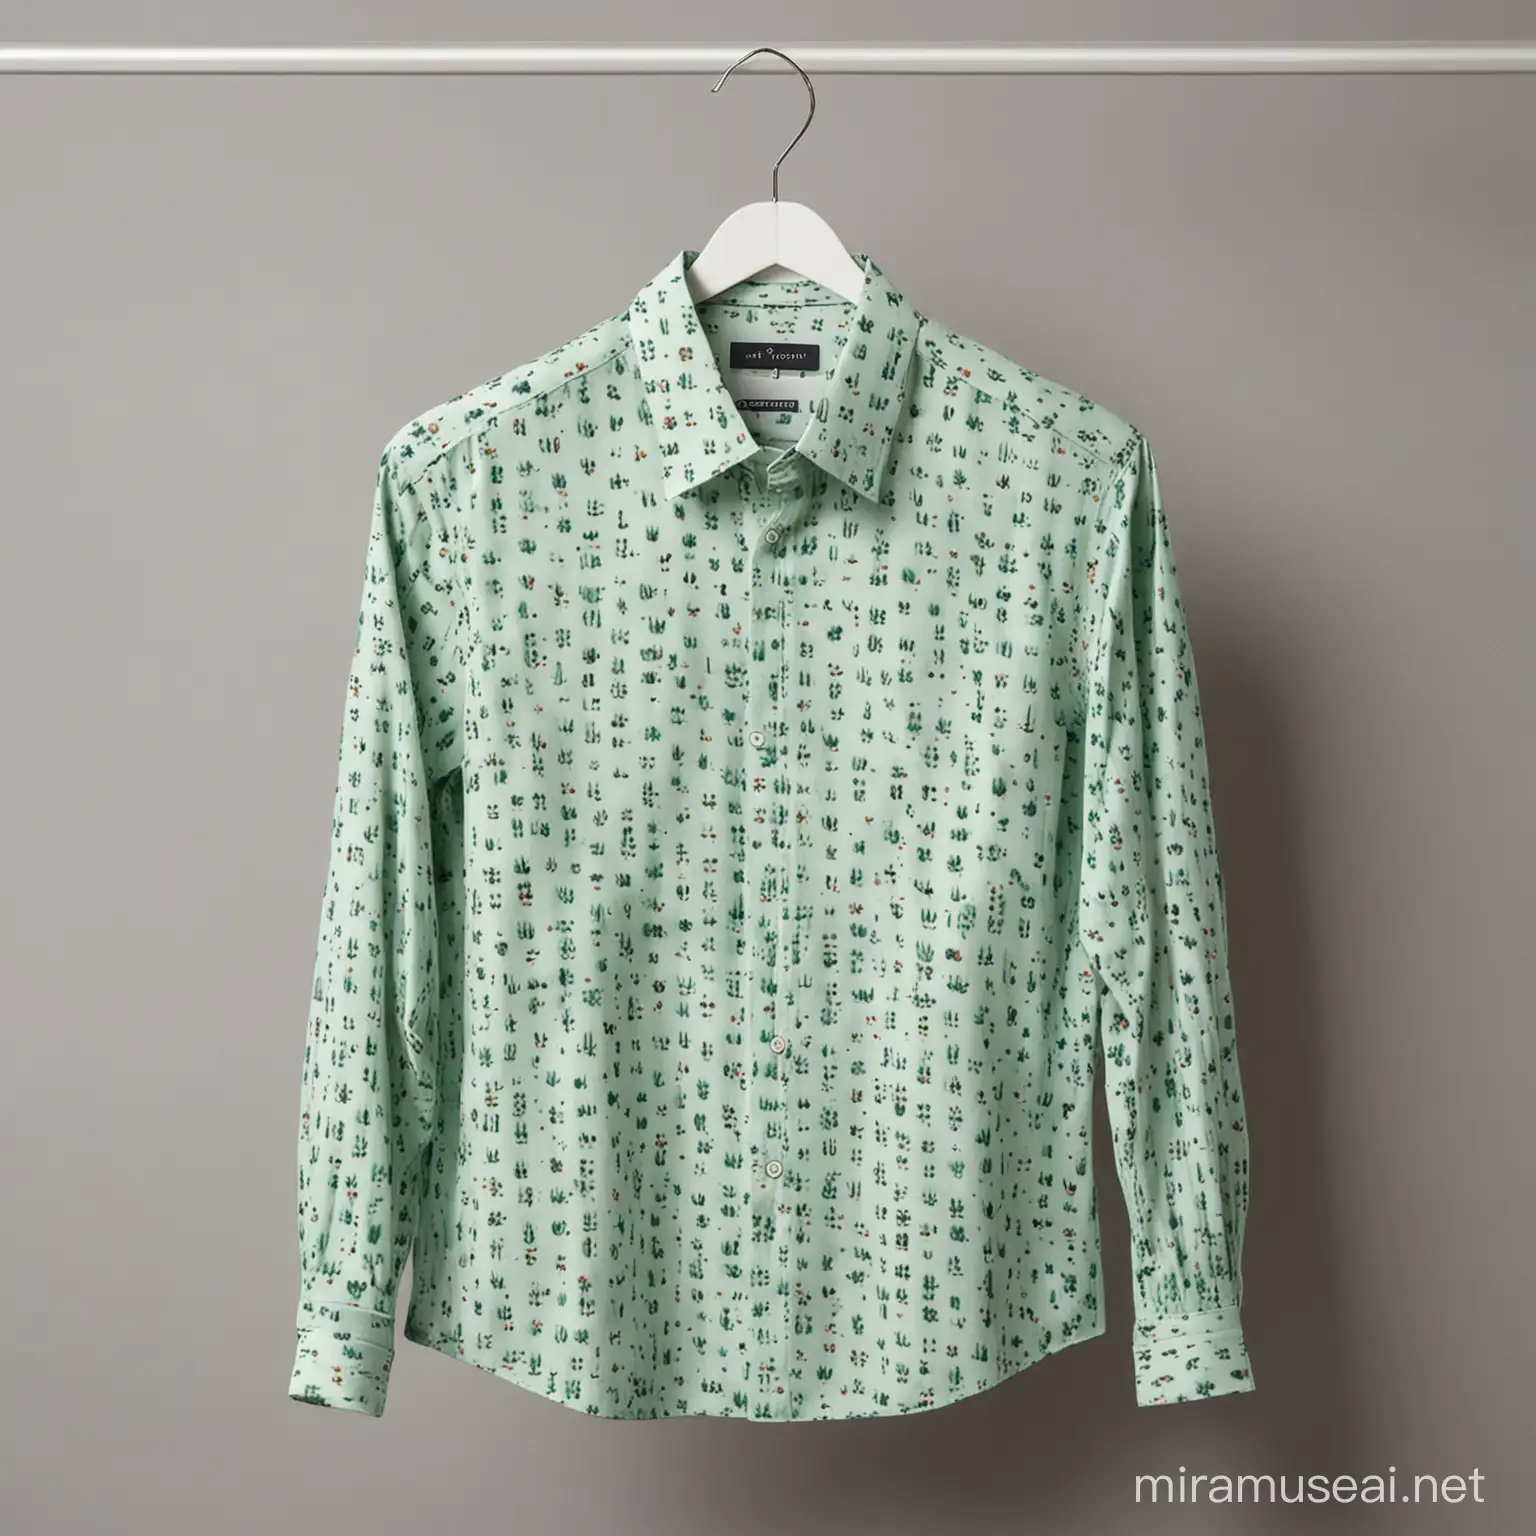 create image of formal green shirt in hanger with minimal micro cactus print
 